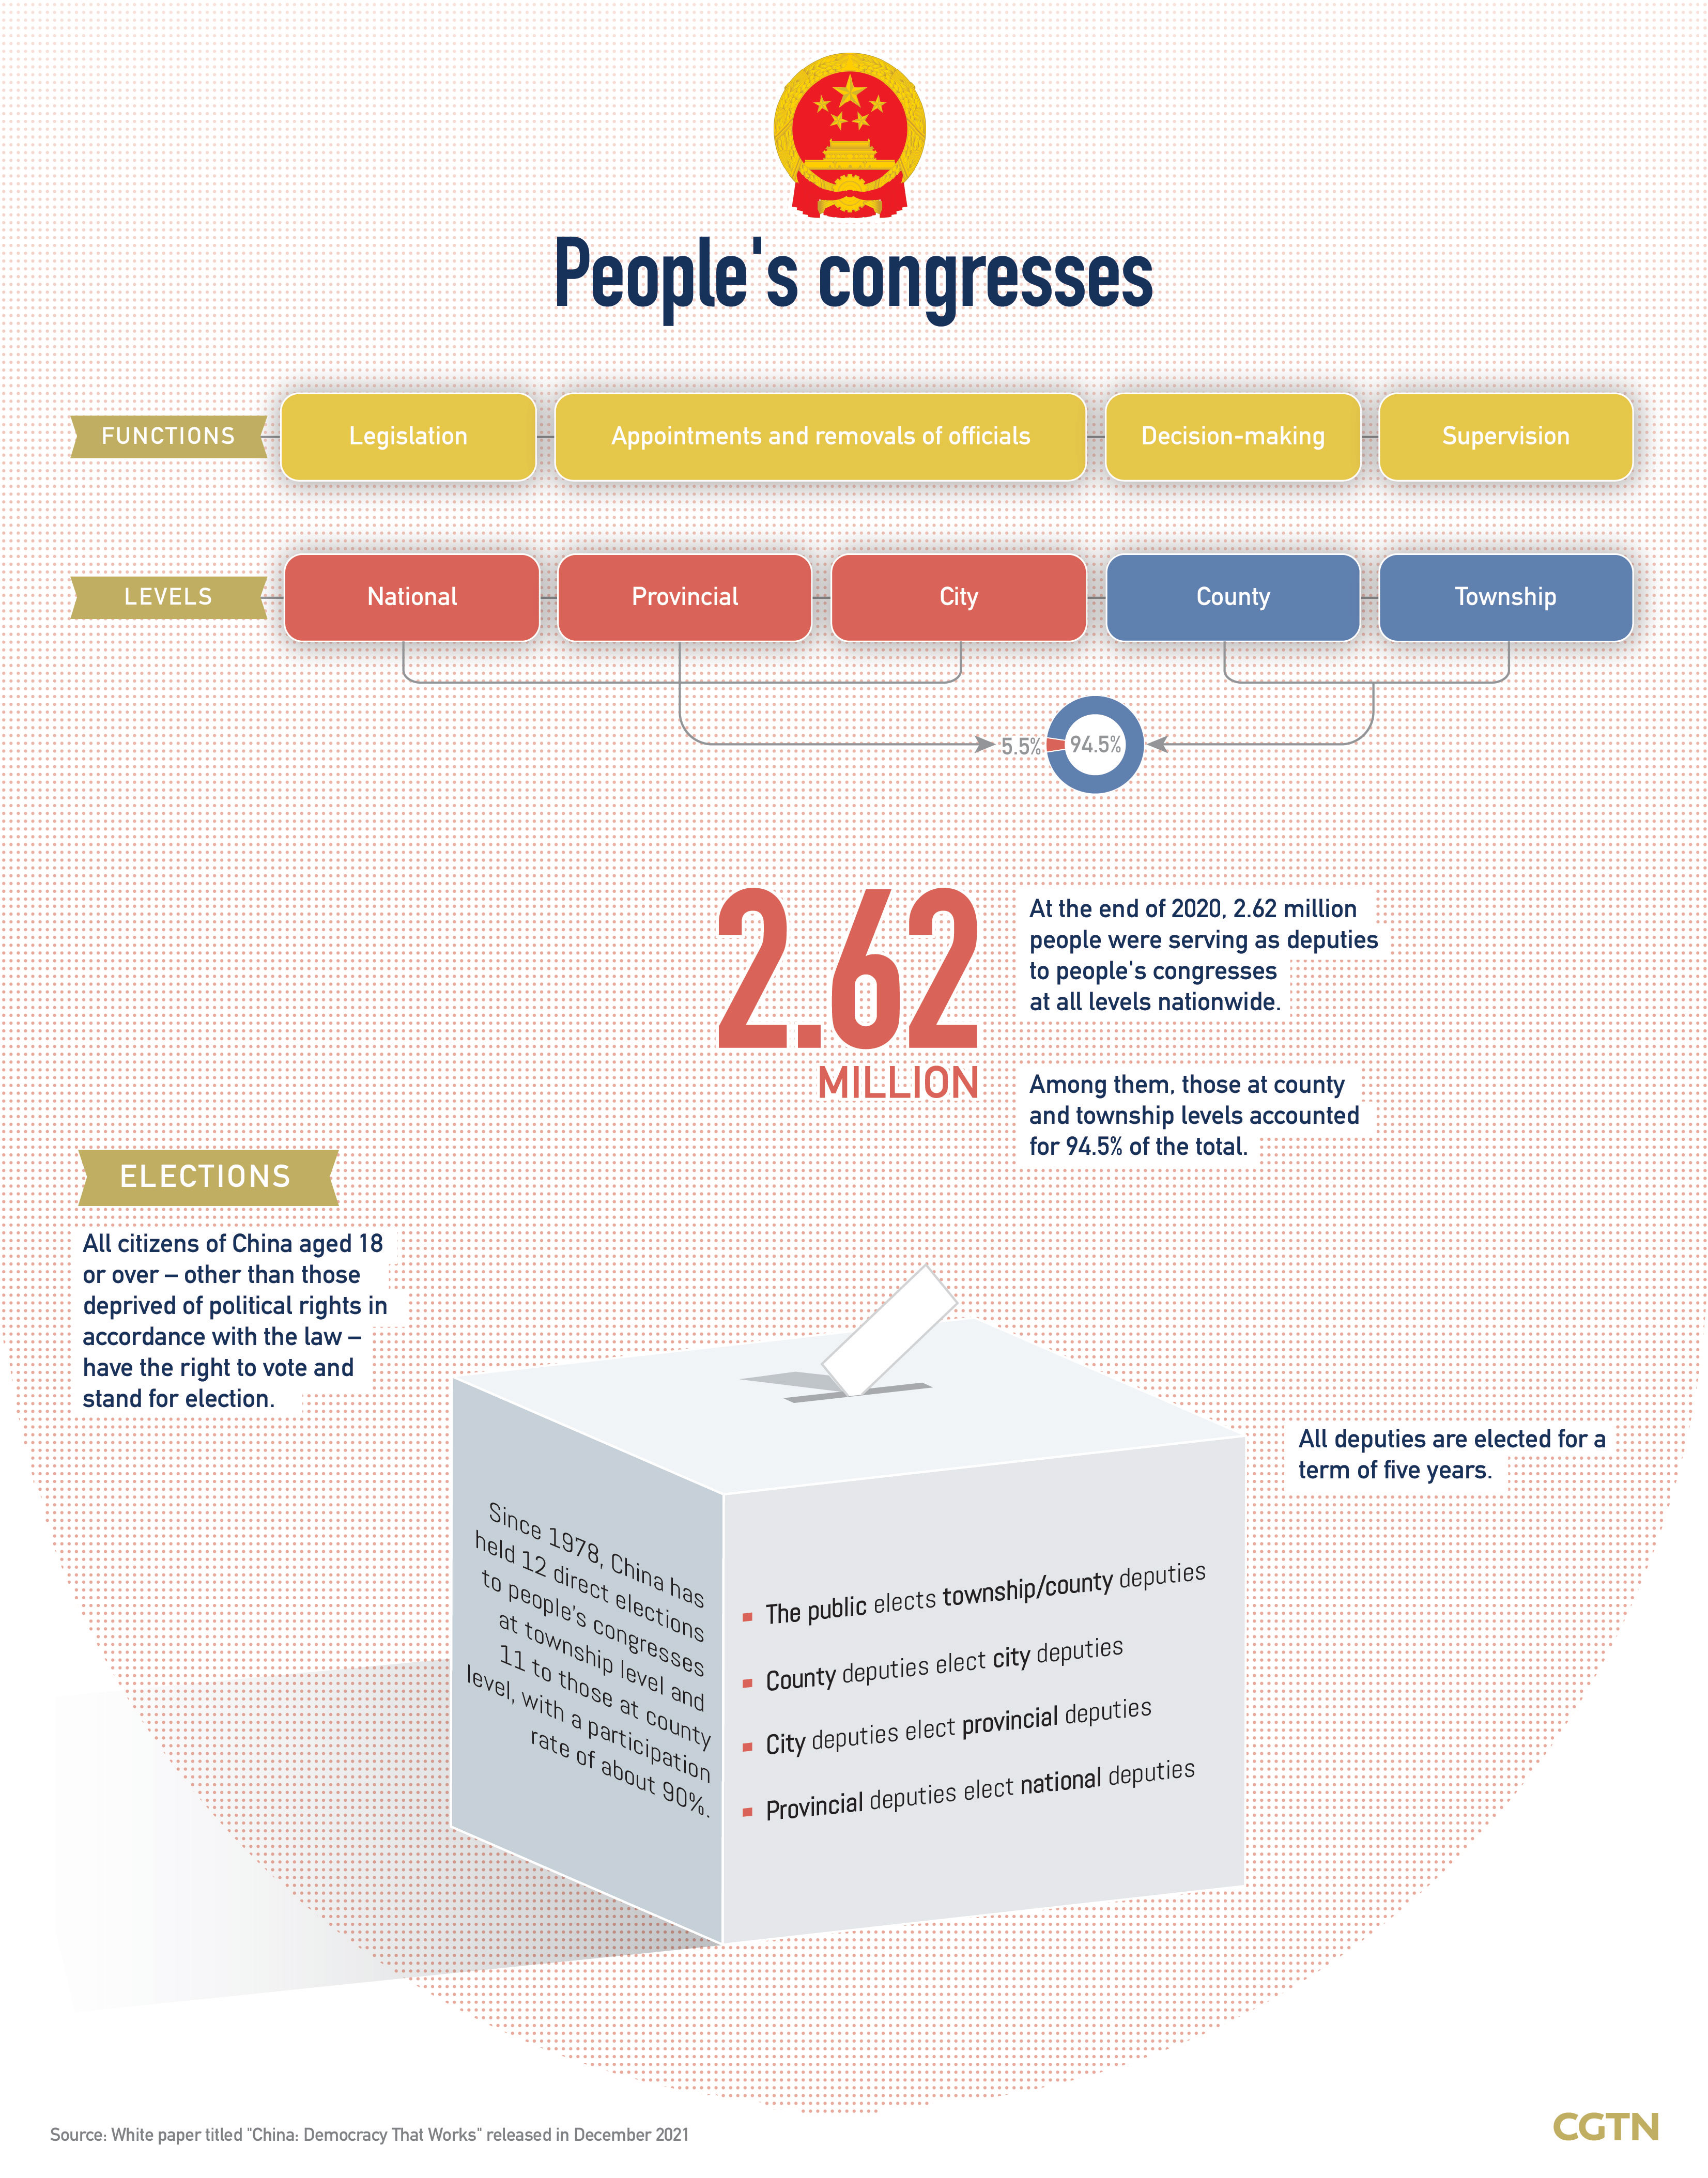 How does China elect deputies to people's congresses?